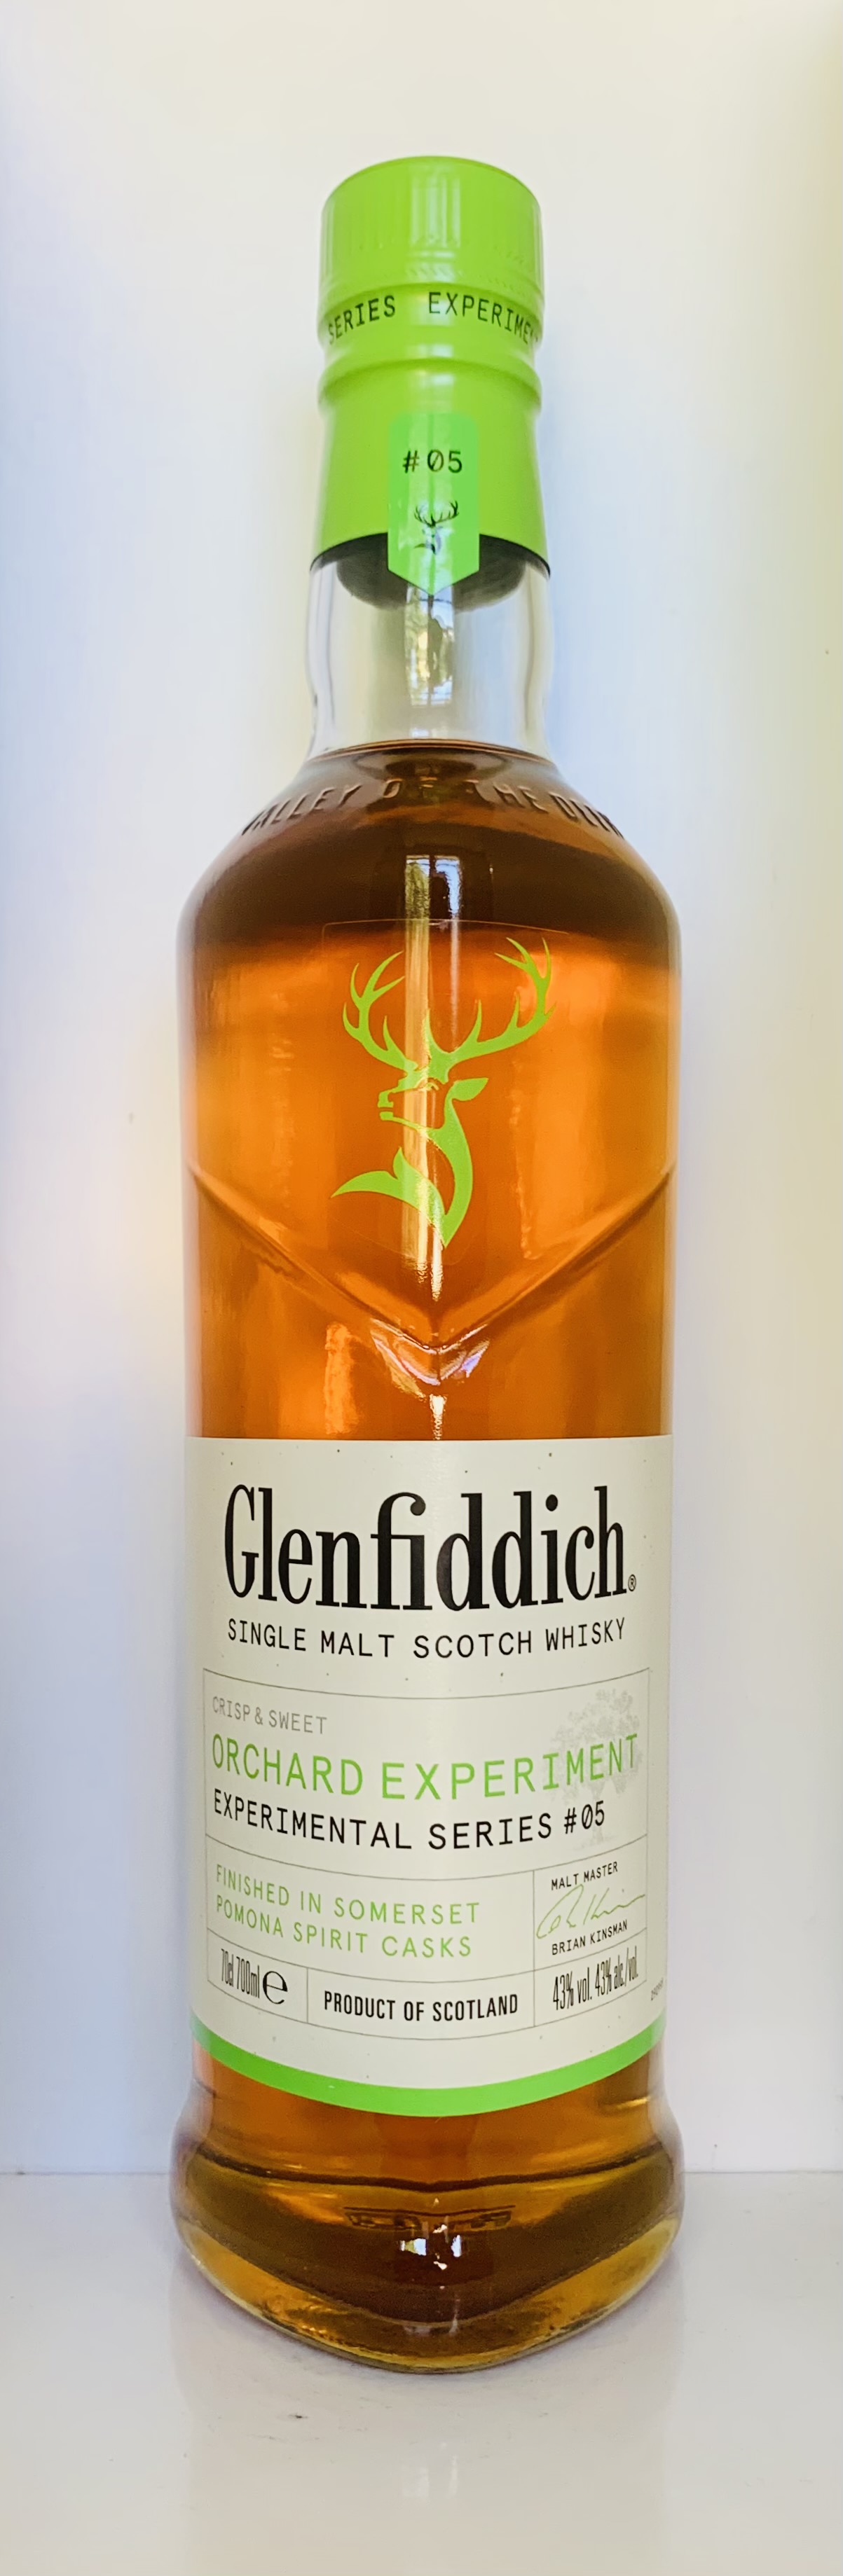 Glenfiddich Orchard Experimental Serie # 05